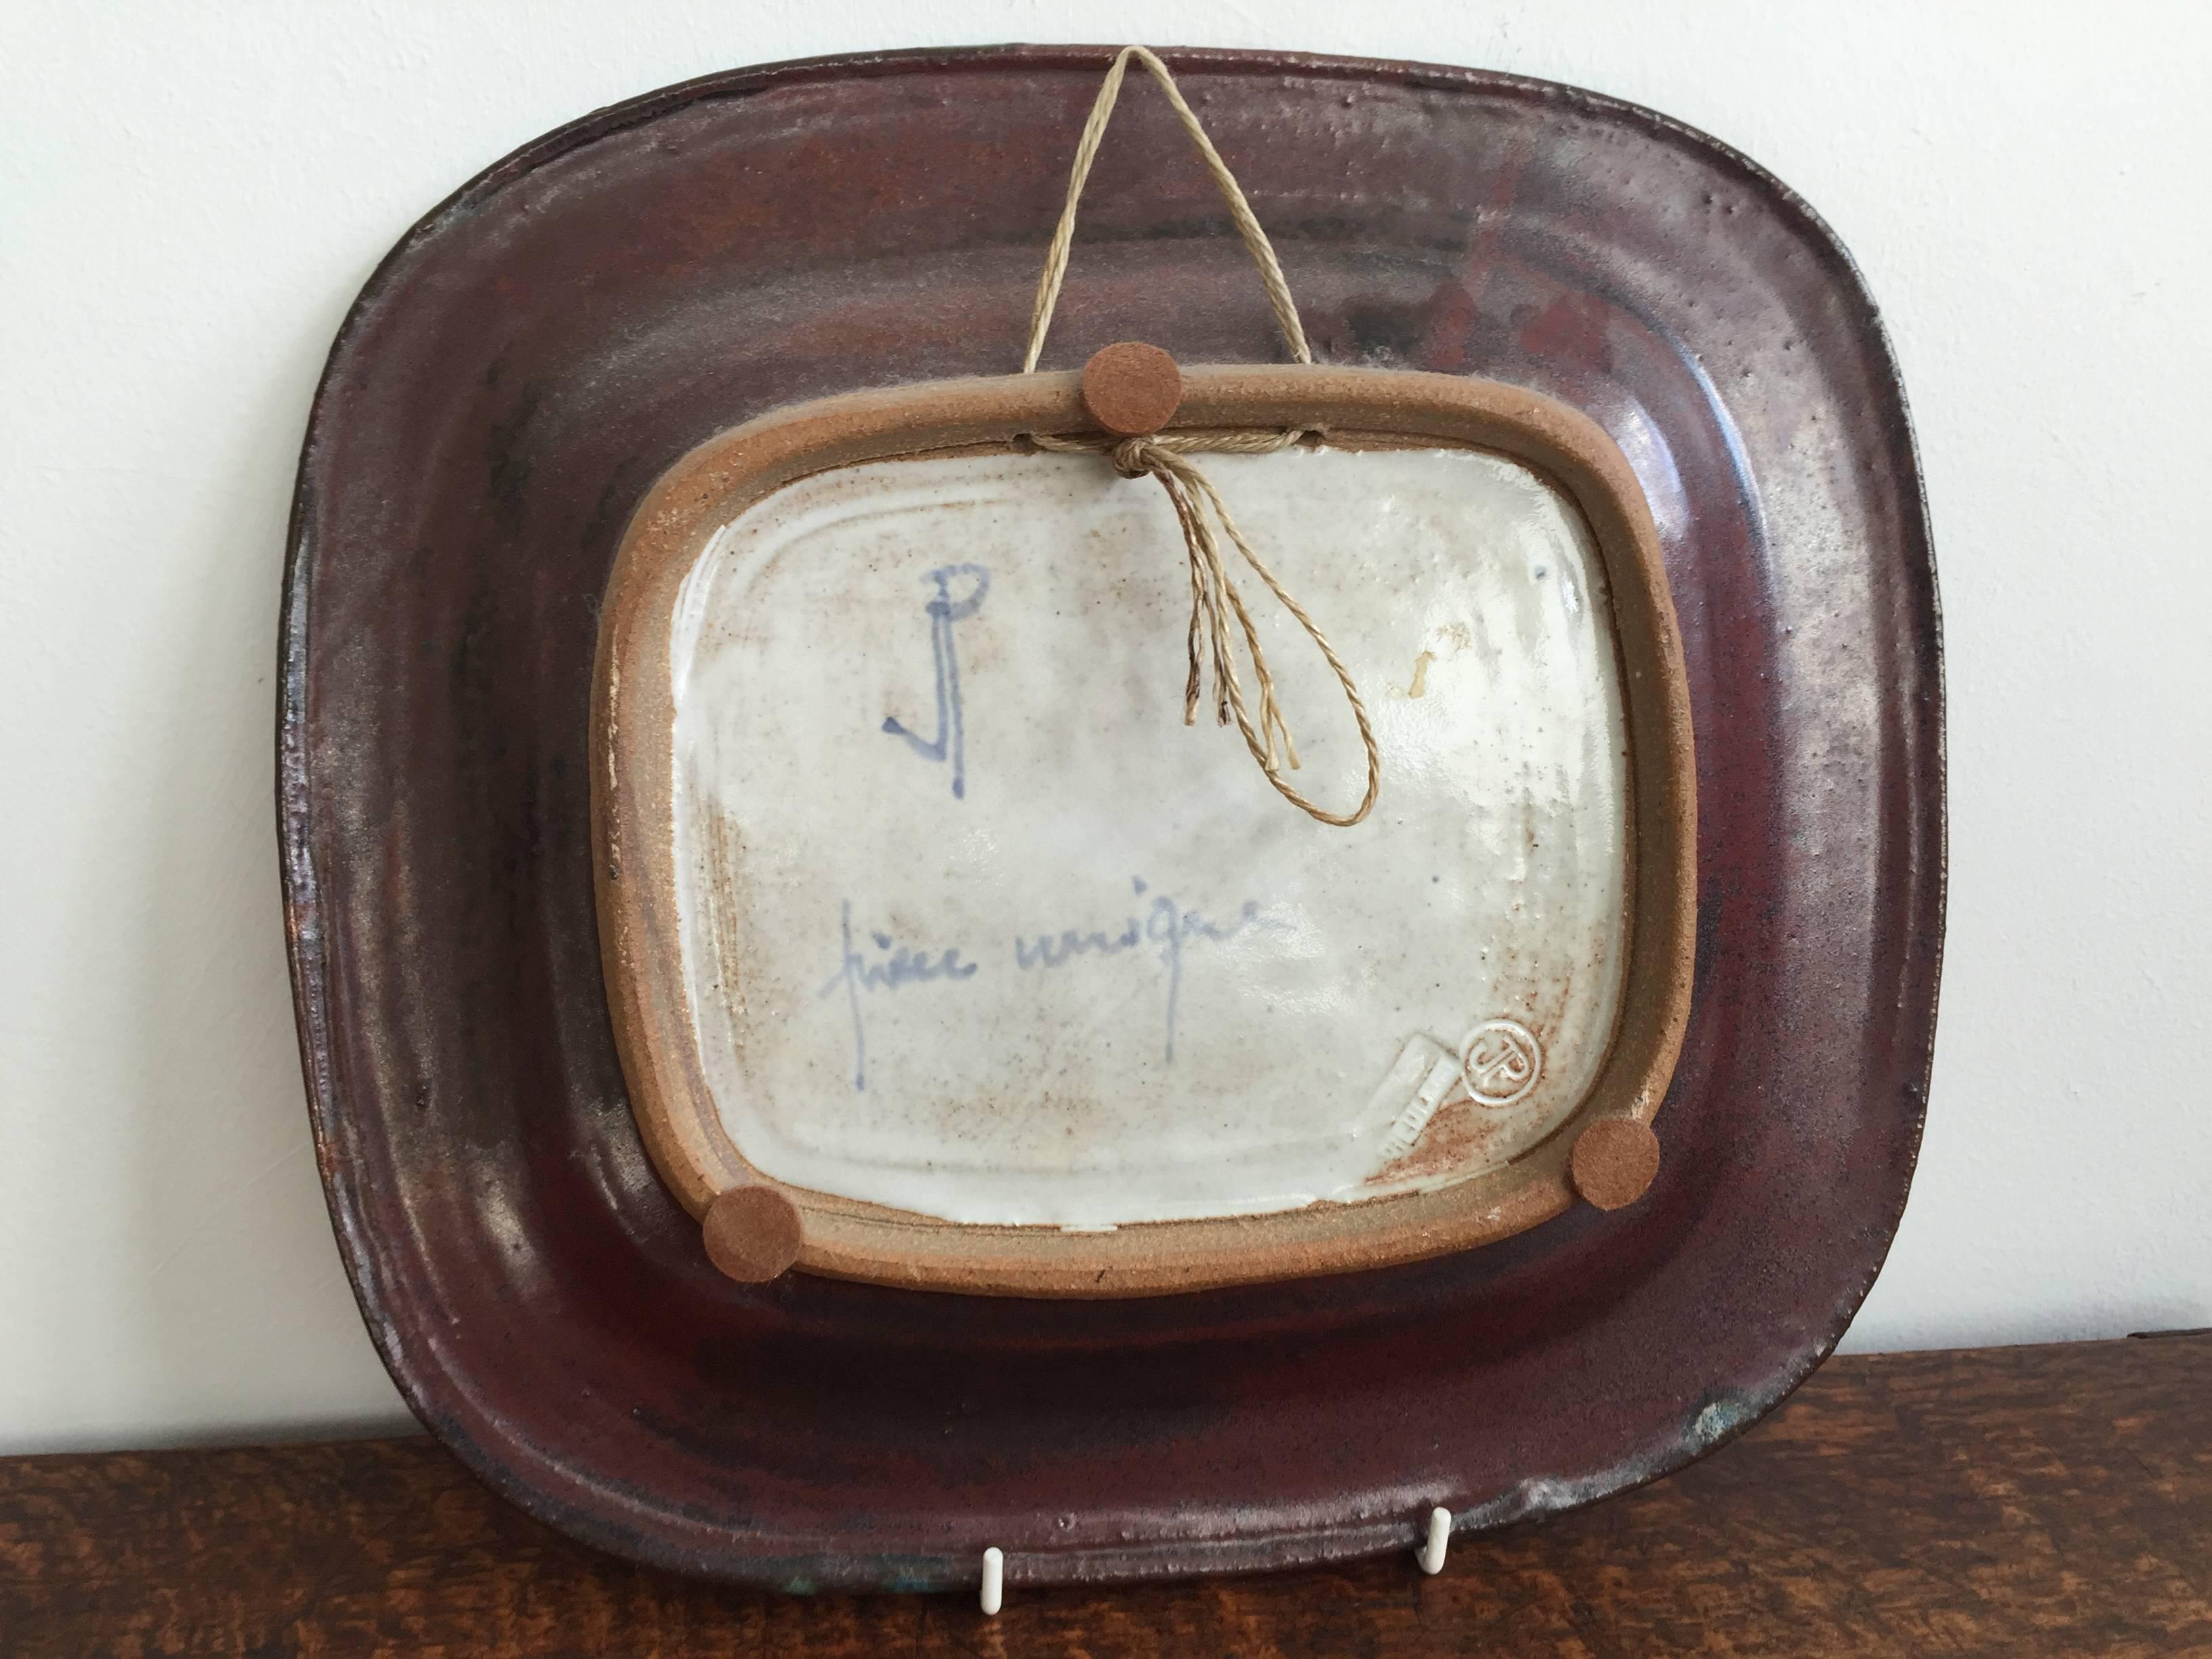 Unique Glazed Abstract Ceramic Dish by Jacques Pouchain Dieulefit, circa 1980 In Excellent Condition For Sale In London, GB